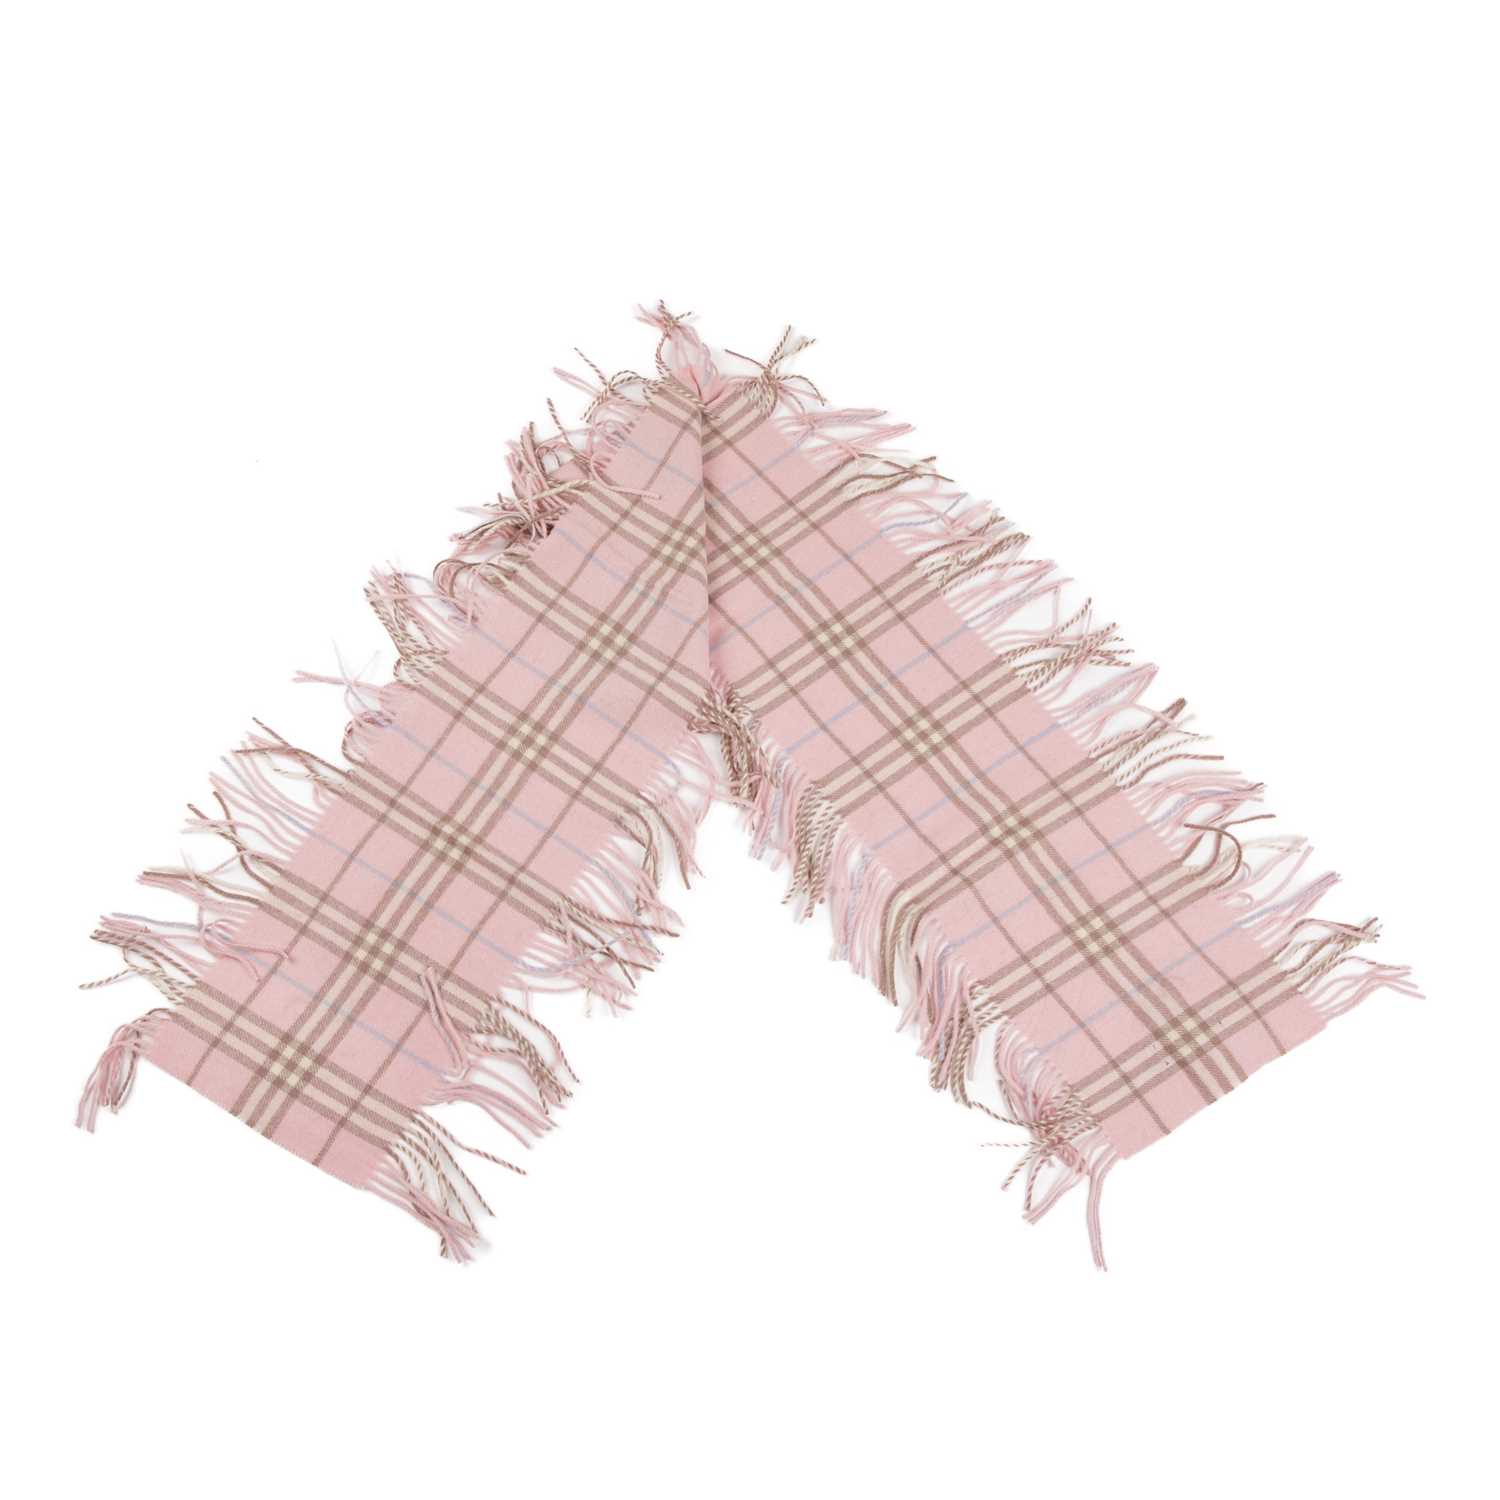 Burberry, two Nova Check lambswool scarves, to include a light blue scarf with fringe detailing at - Image 3 of 4